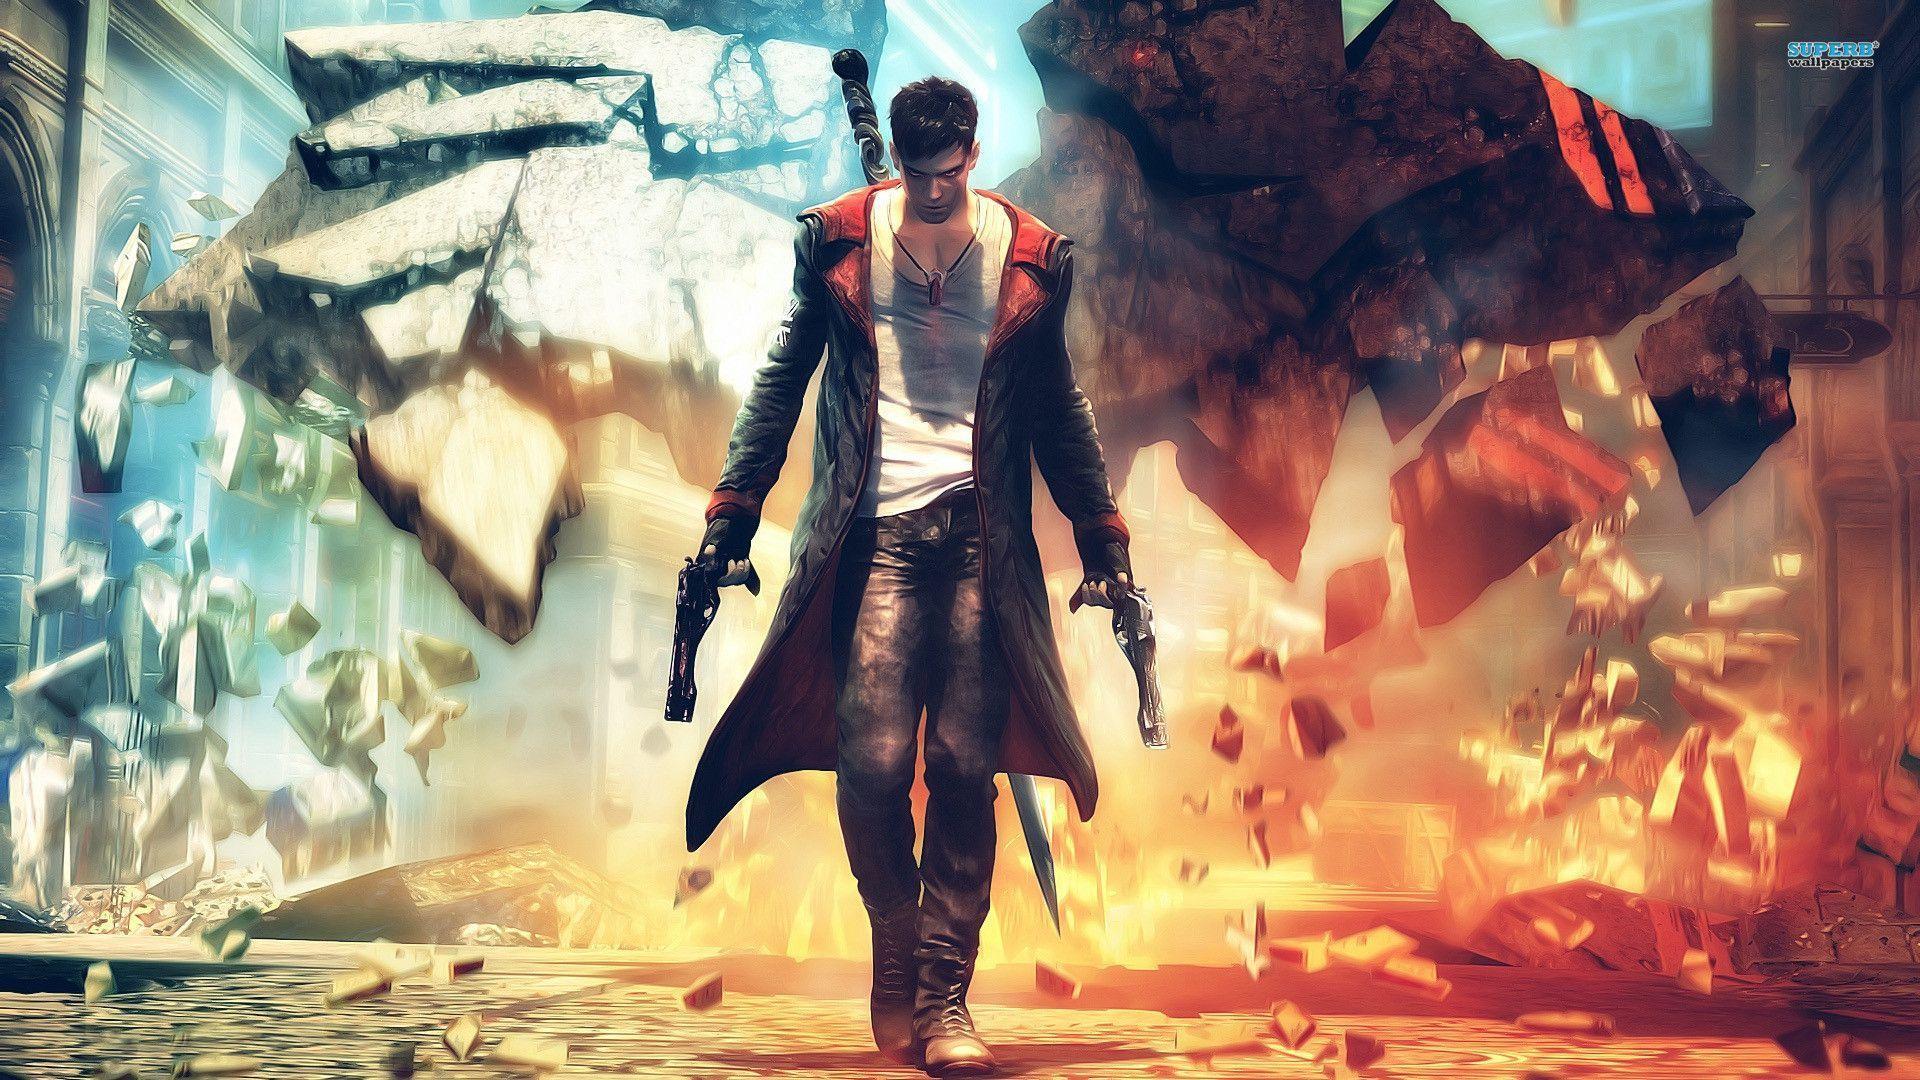 free download devil may cry v